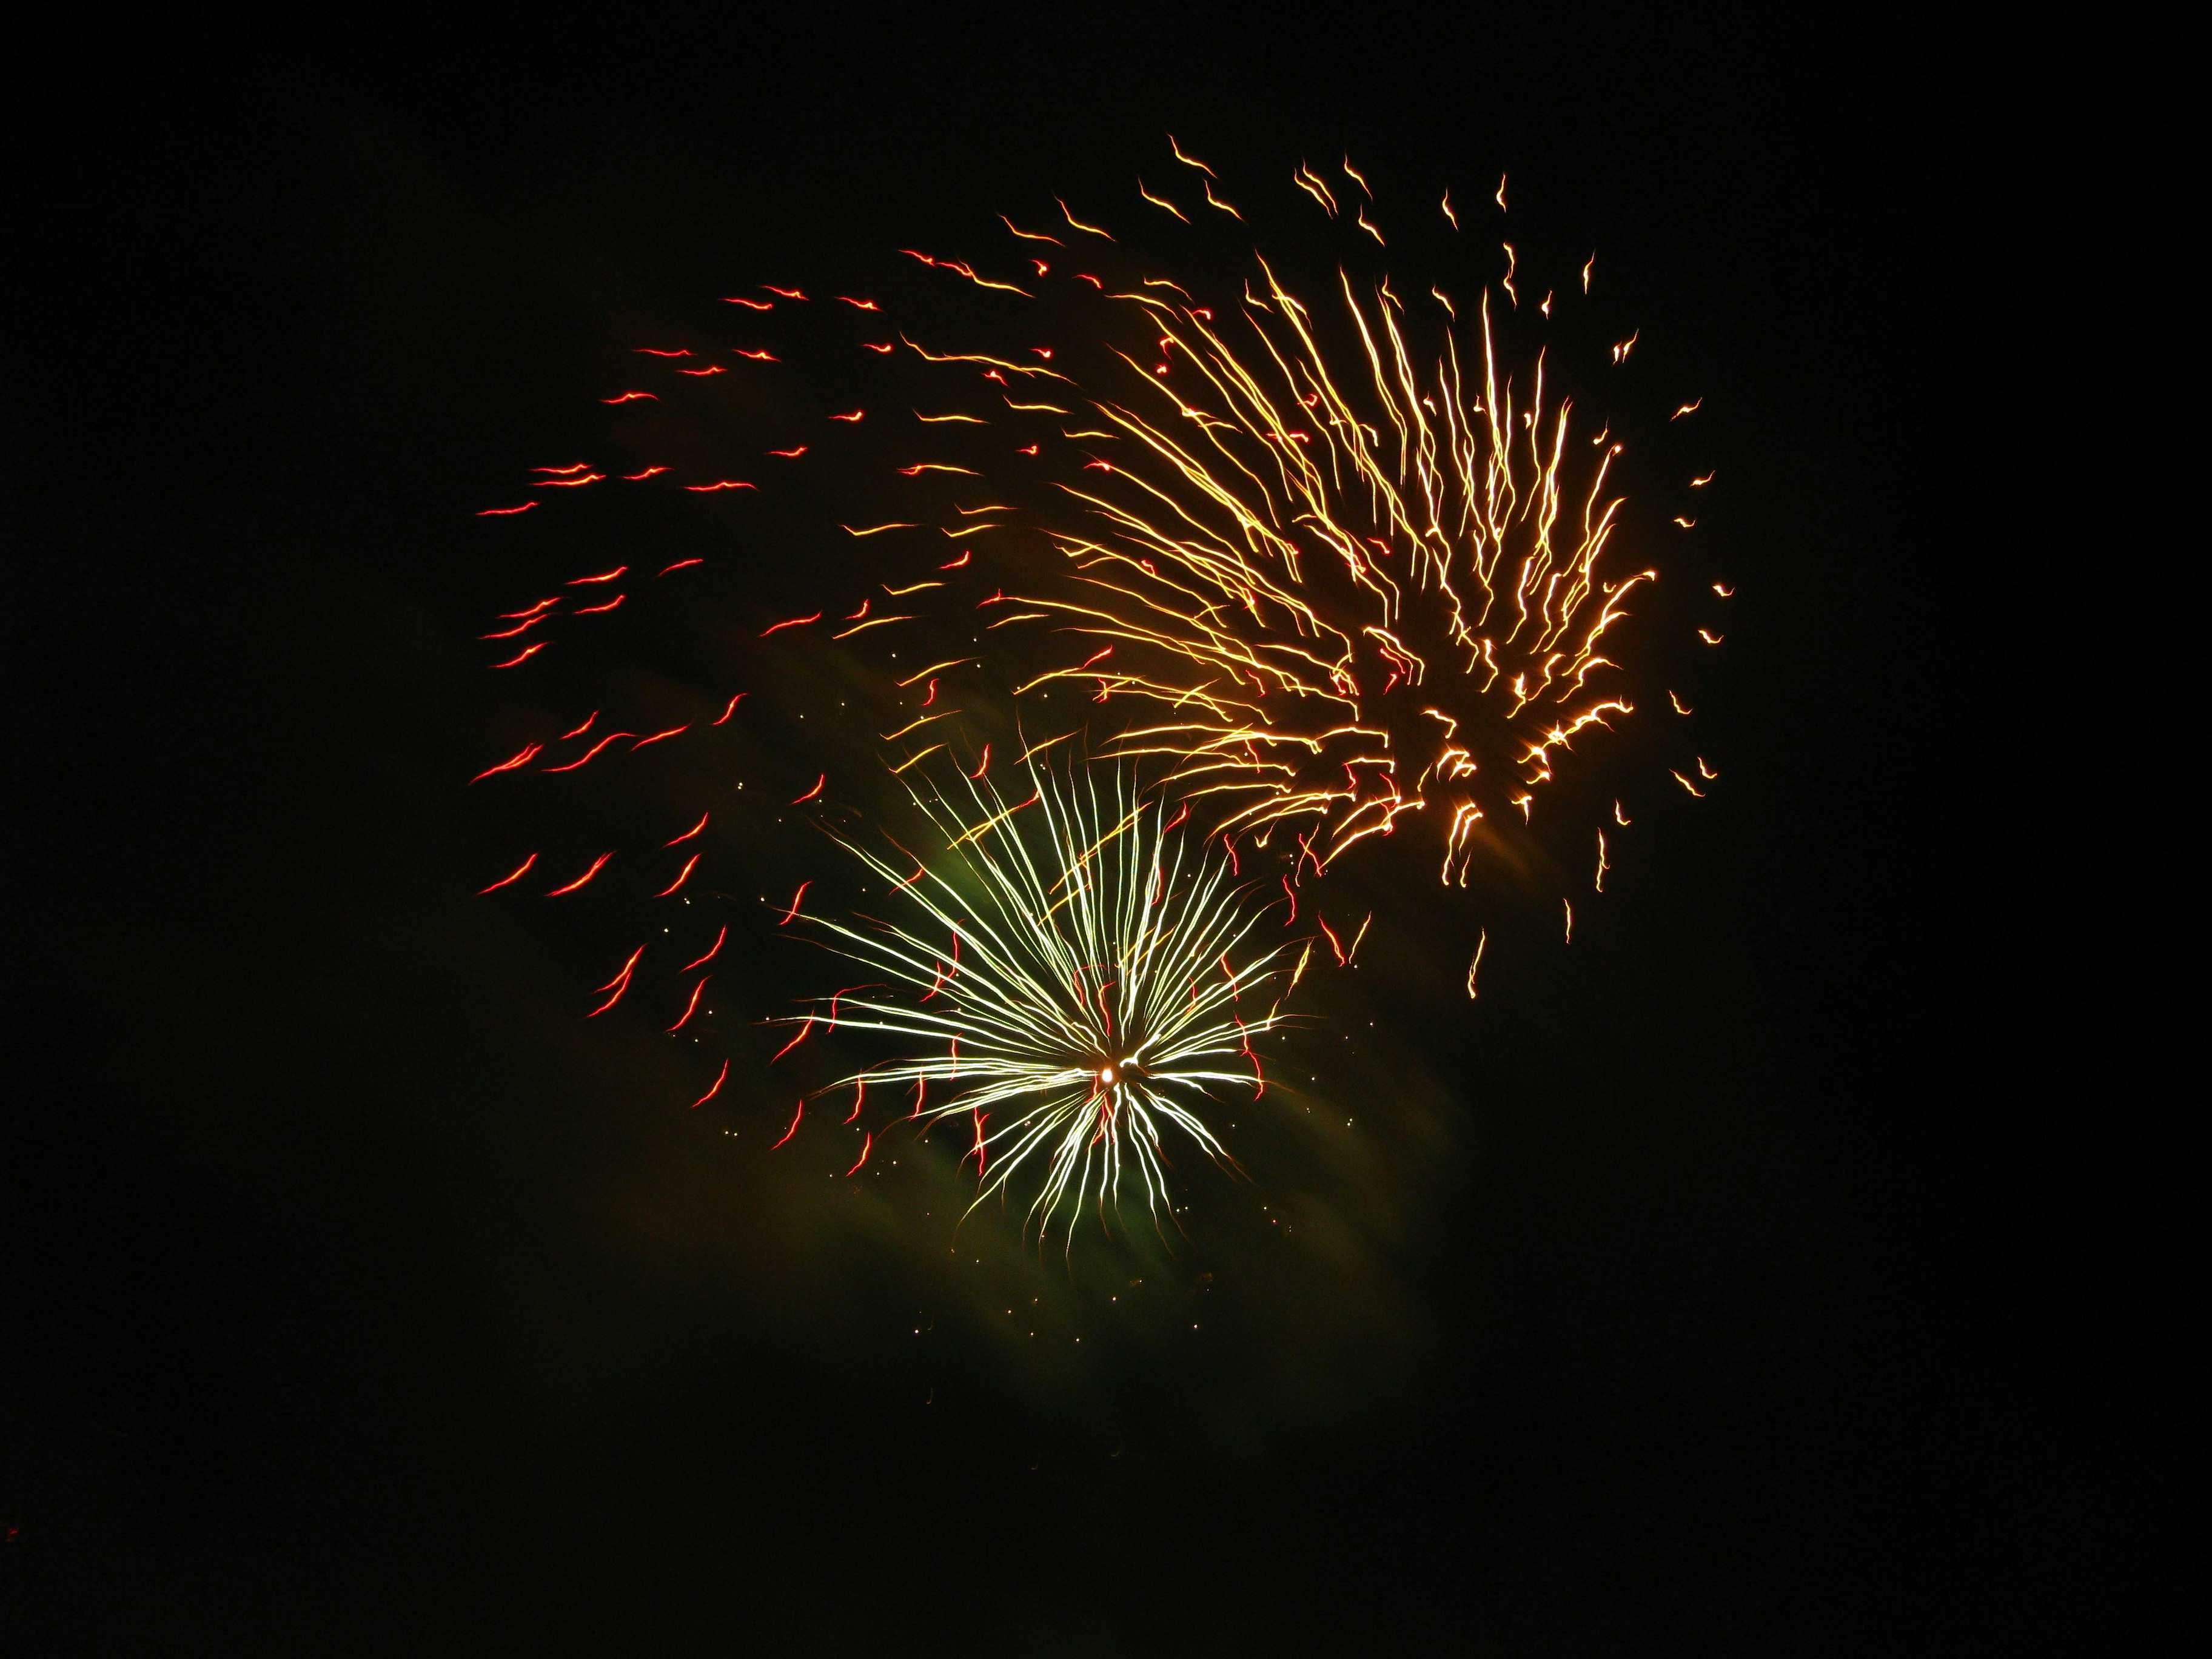 red and yellow fireworks display